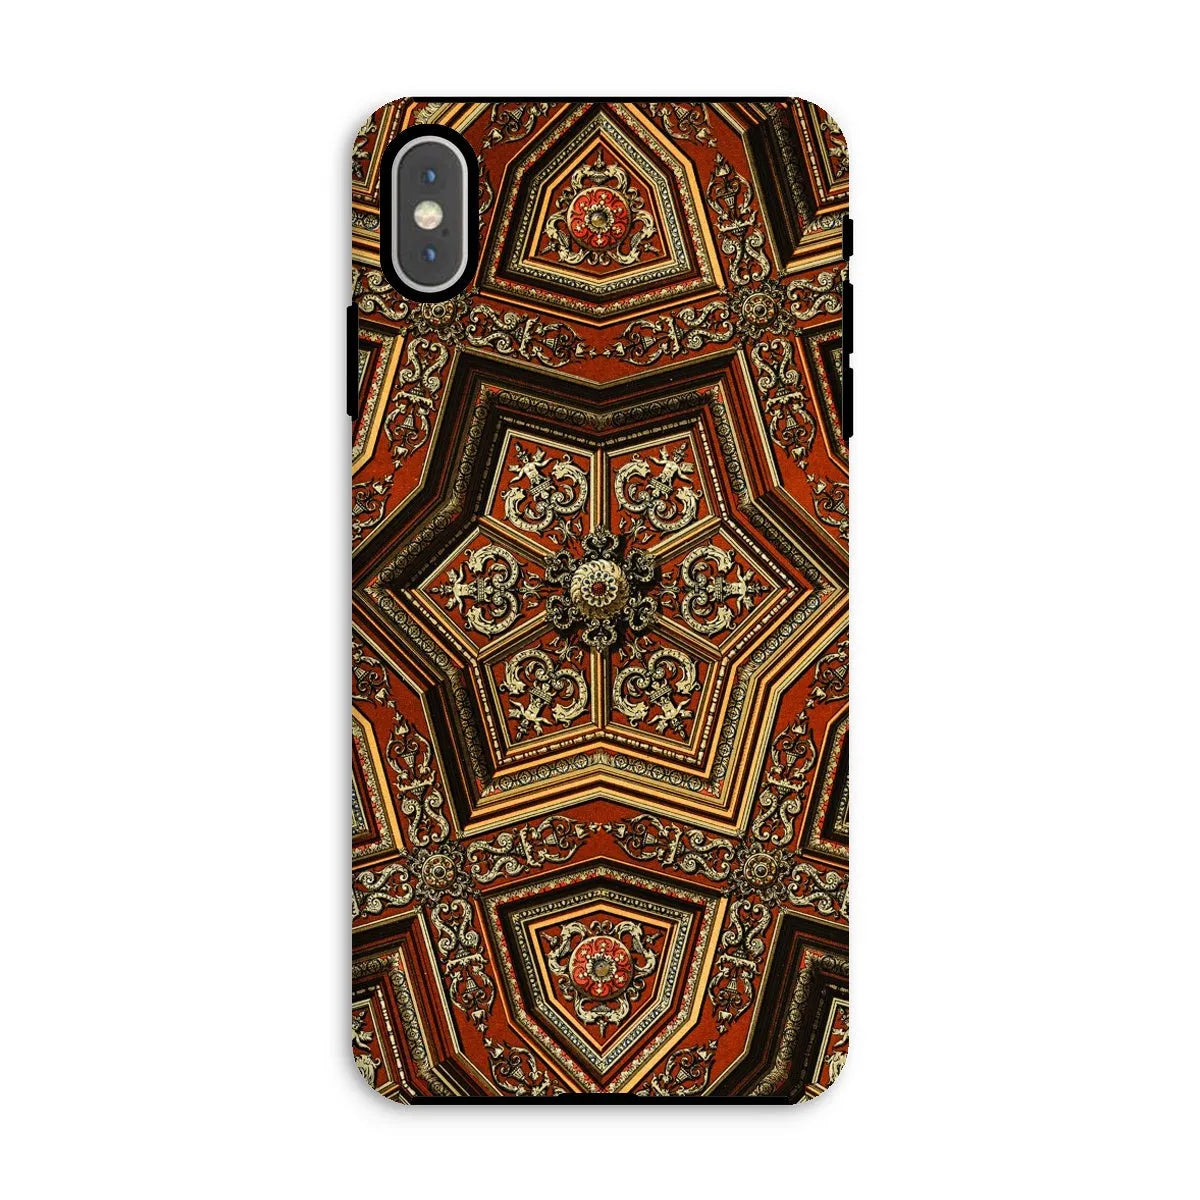 Renaissance Pattern By Auguste Racinet Tough Phone Case - Iphone Xs Max / Gloss - Mobile Phone Cases - Aesthetic Art